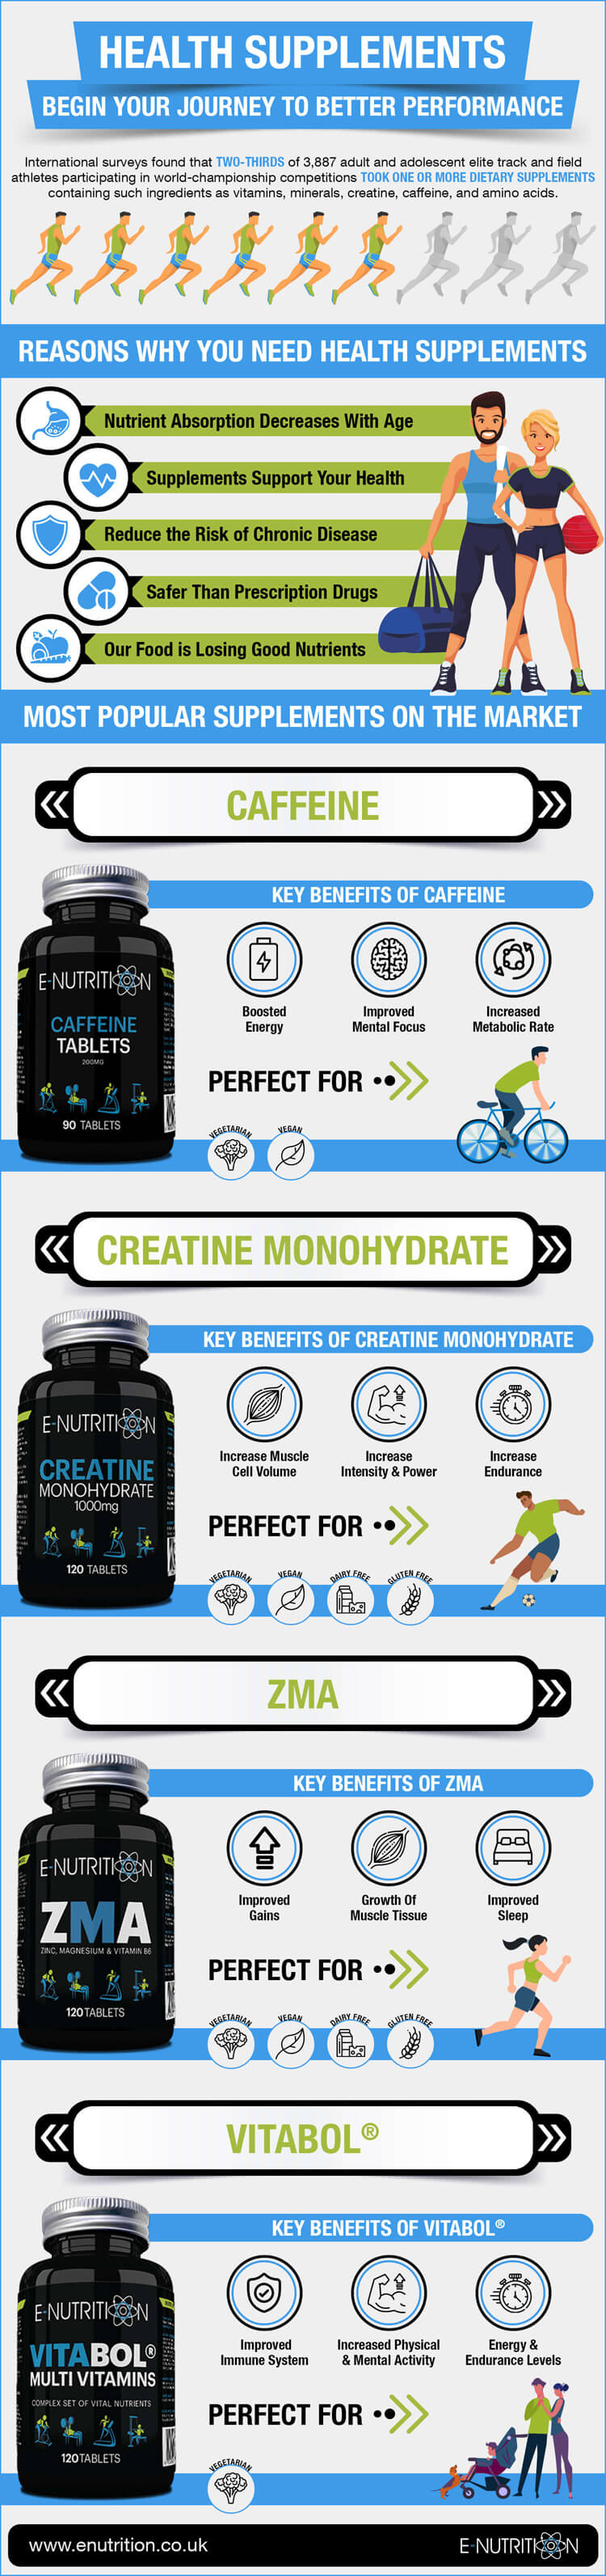 Health Supplements - Begin Your Journey To Better Performance